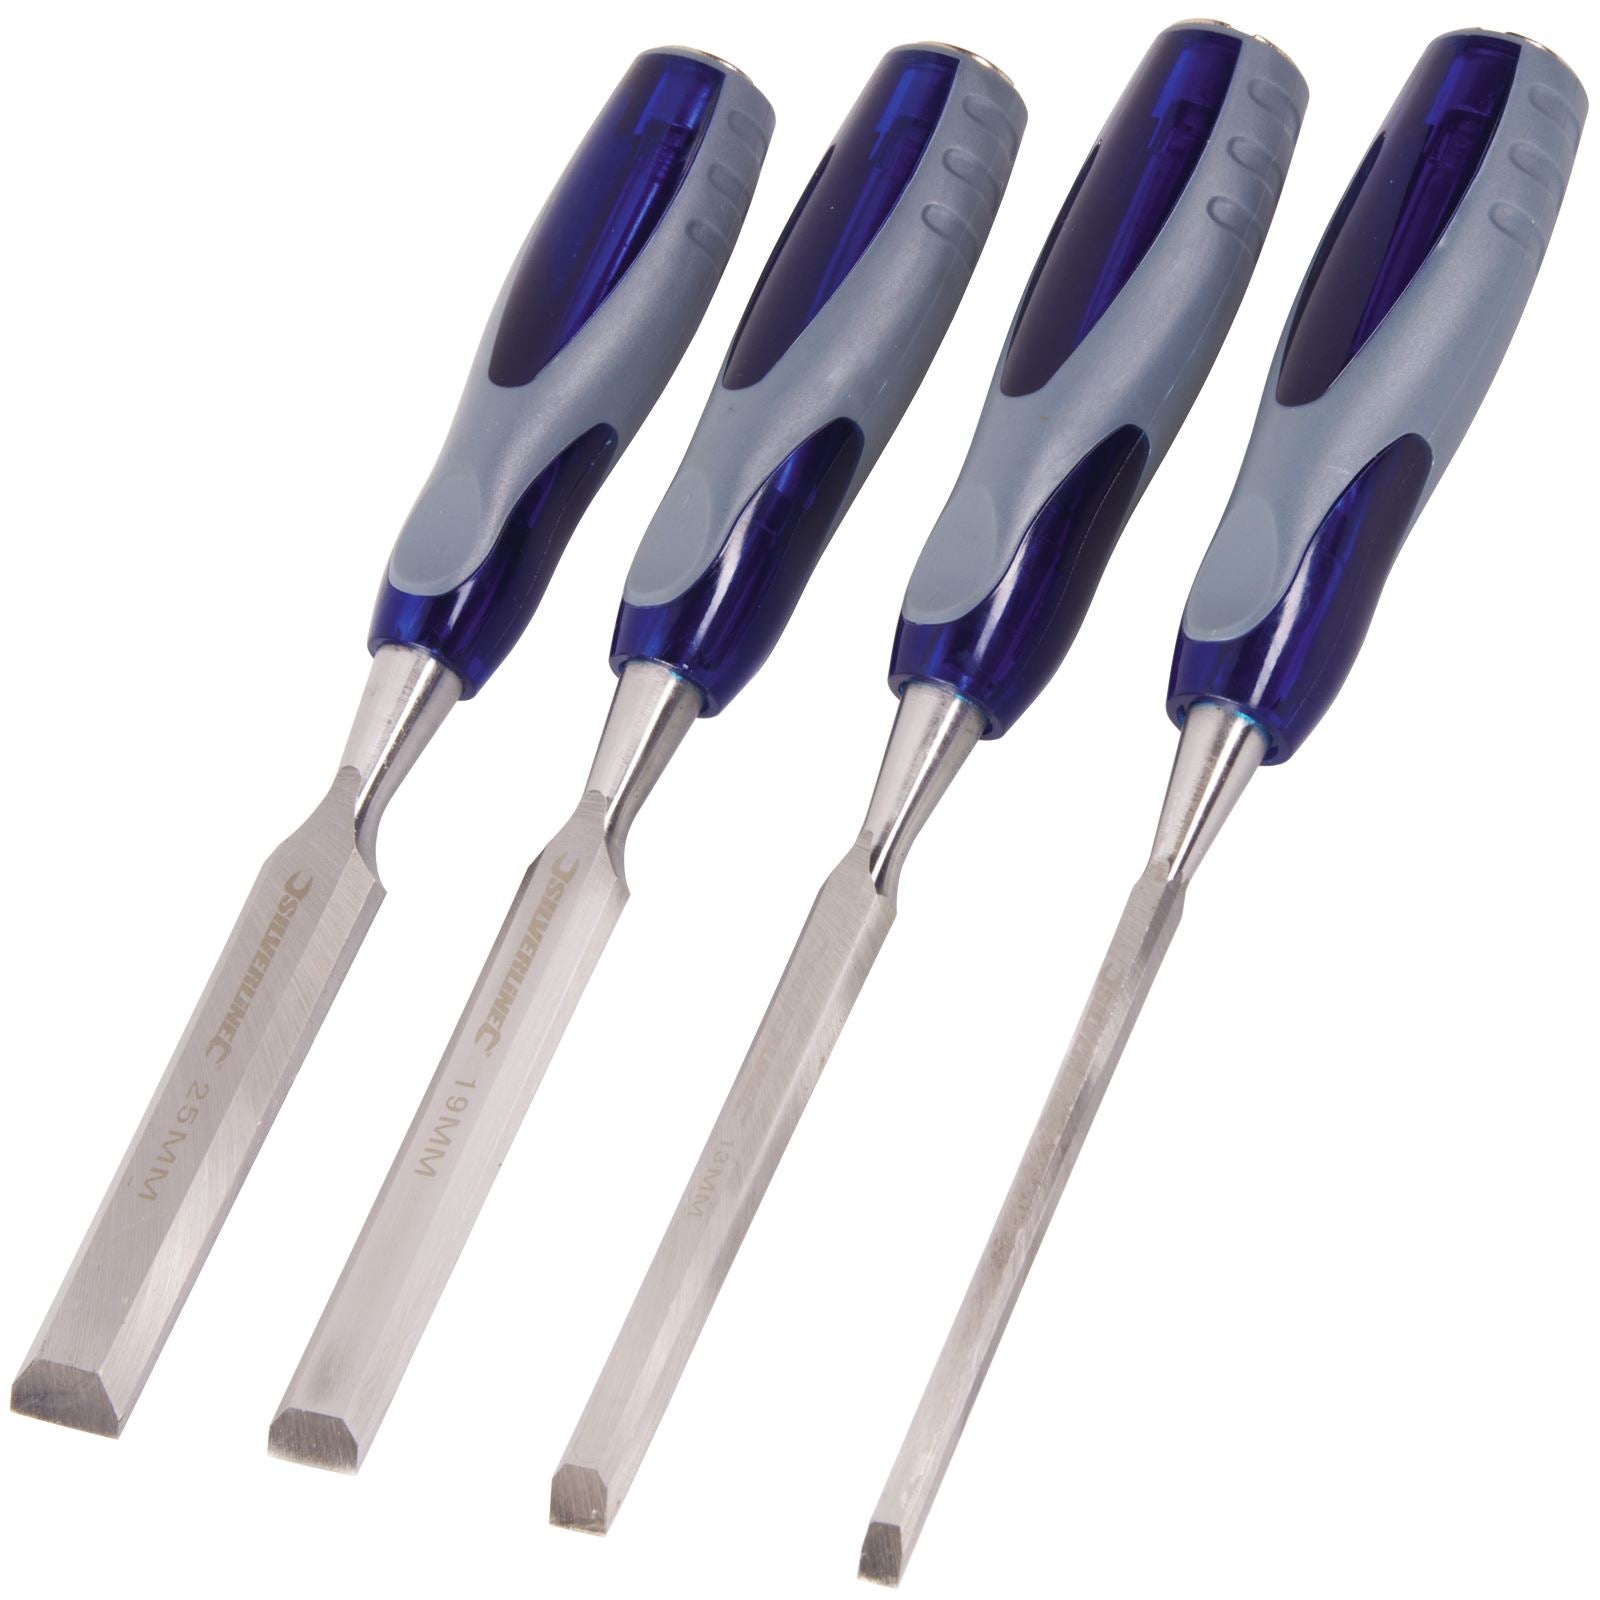 Silverline 4 Piece Expert Wood Chisel Set 6-25mm Carpentry Hammer Joinery